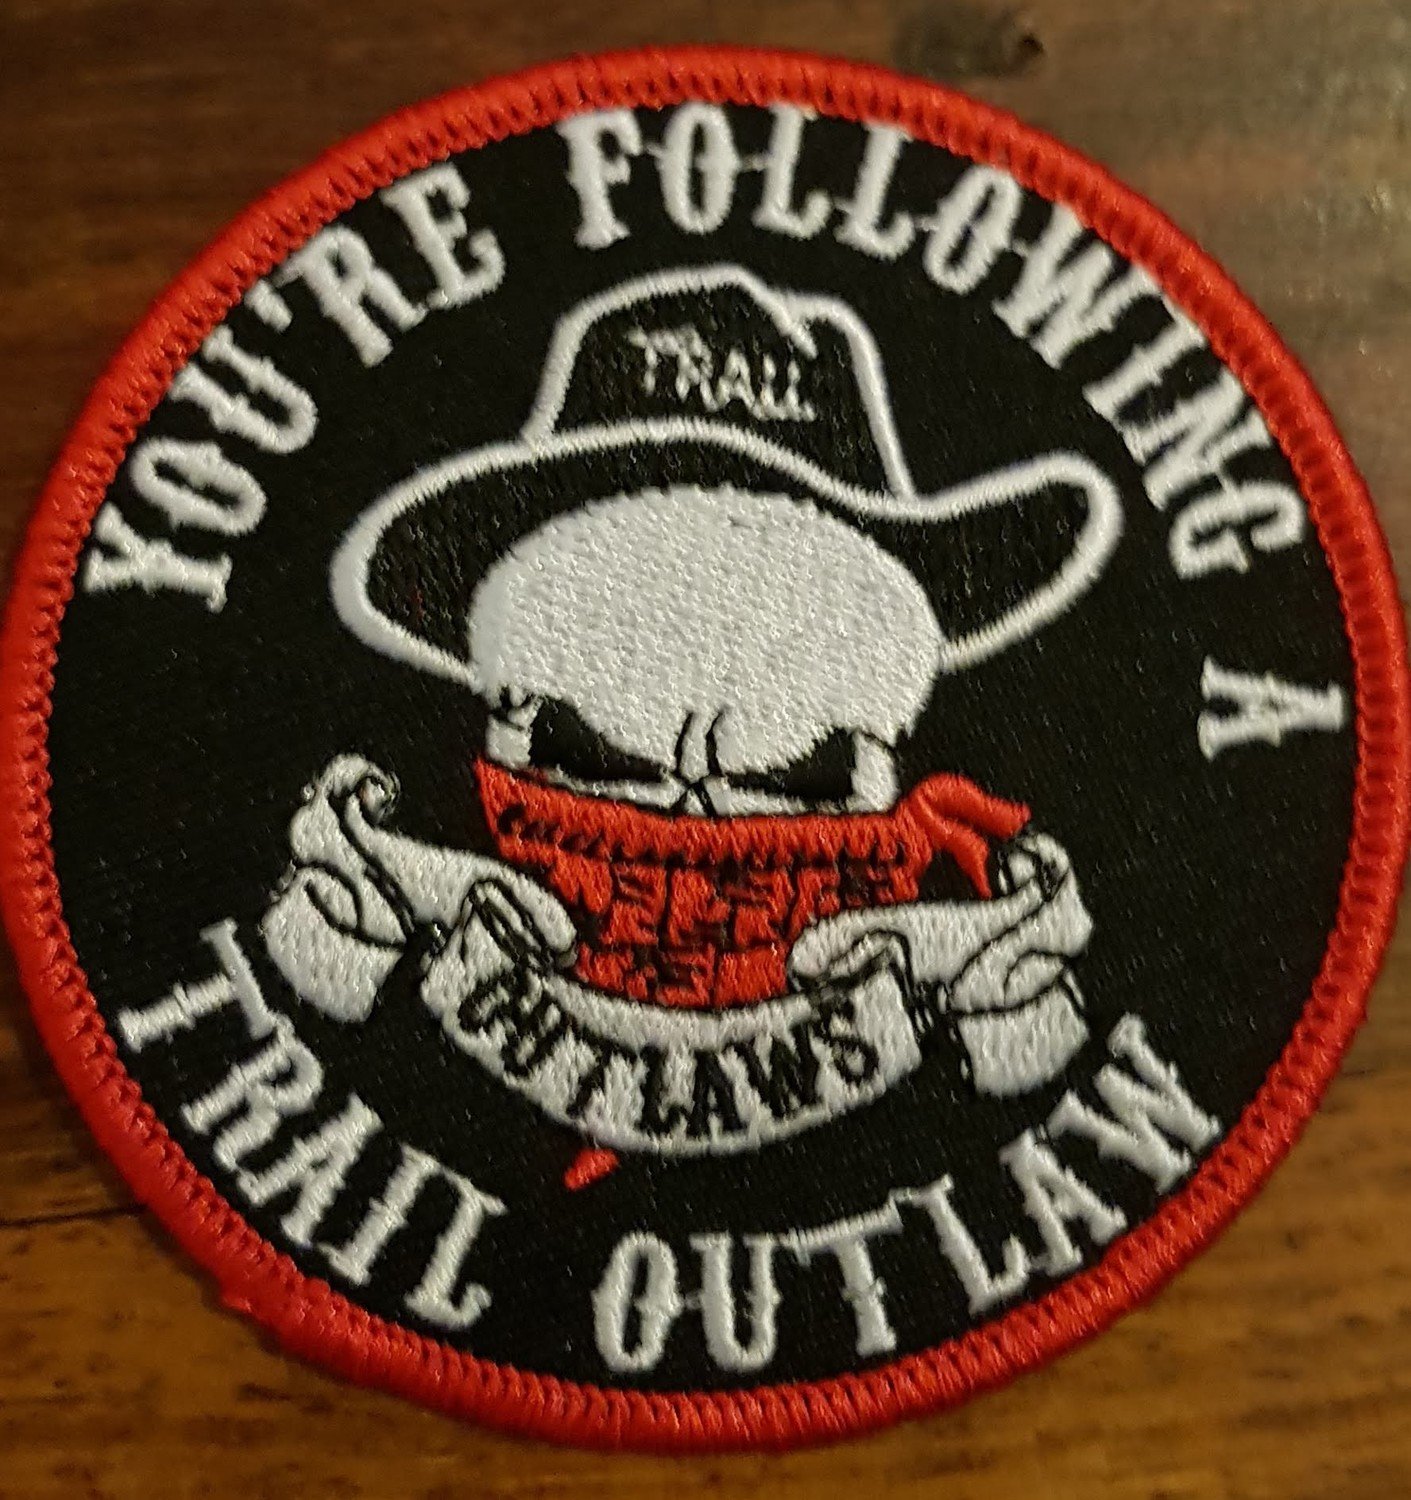 Trail Outlaws Embroidered Patches